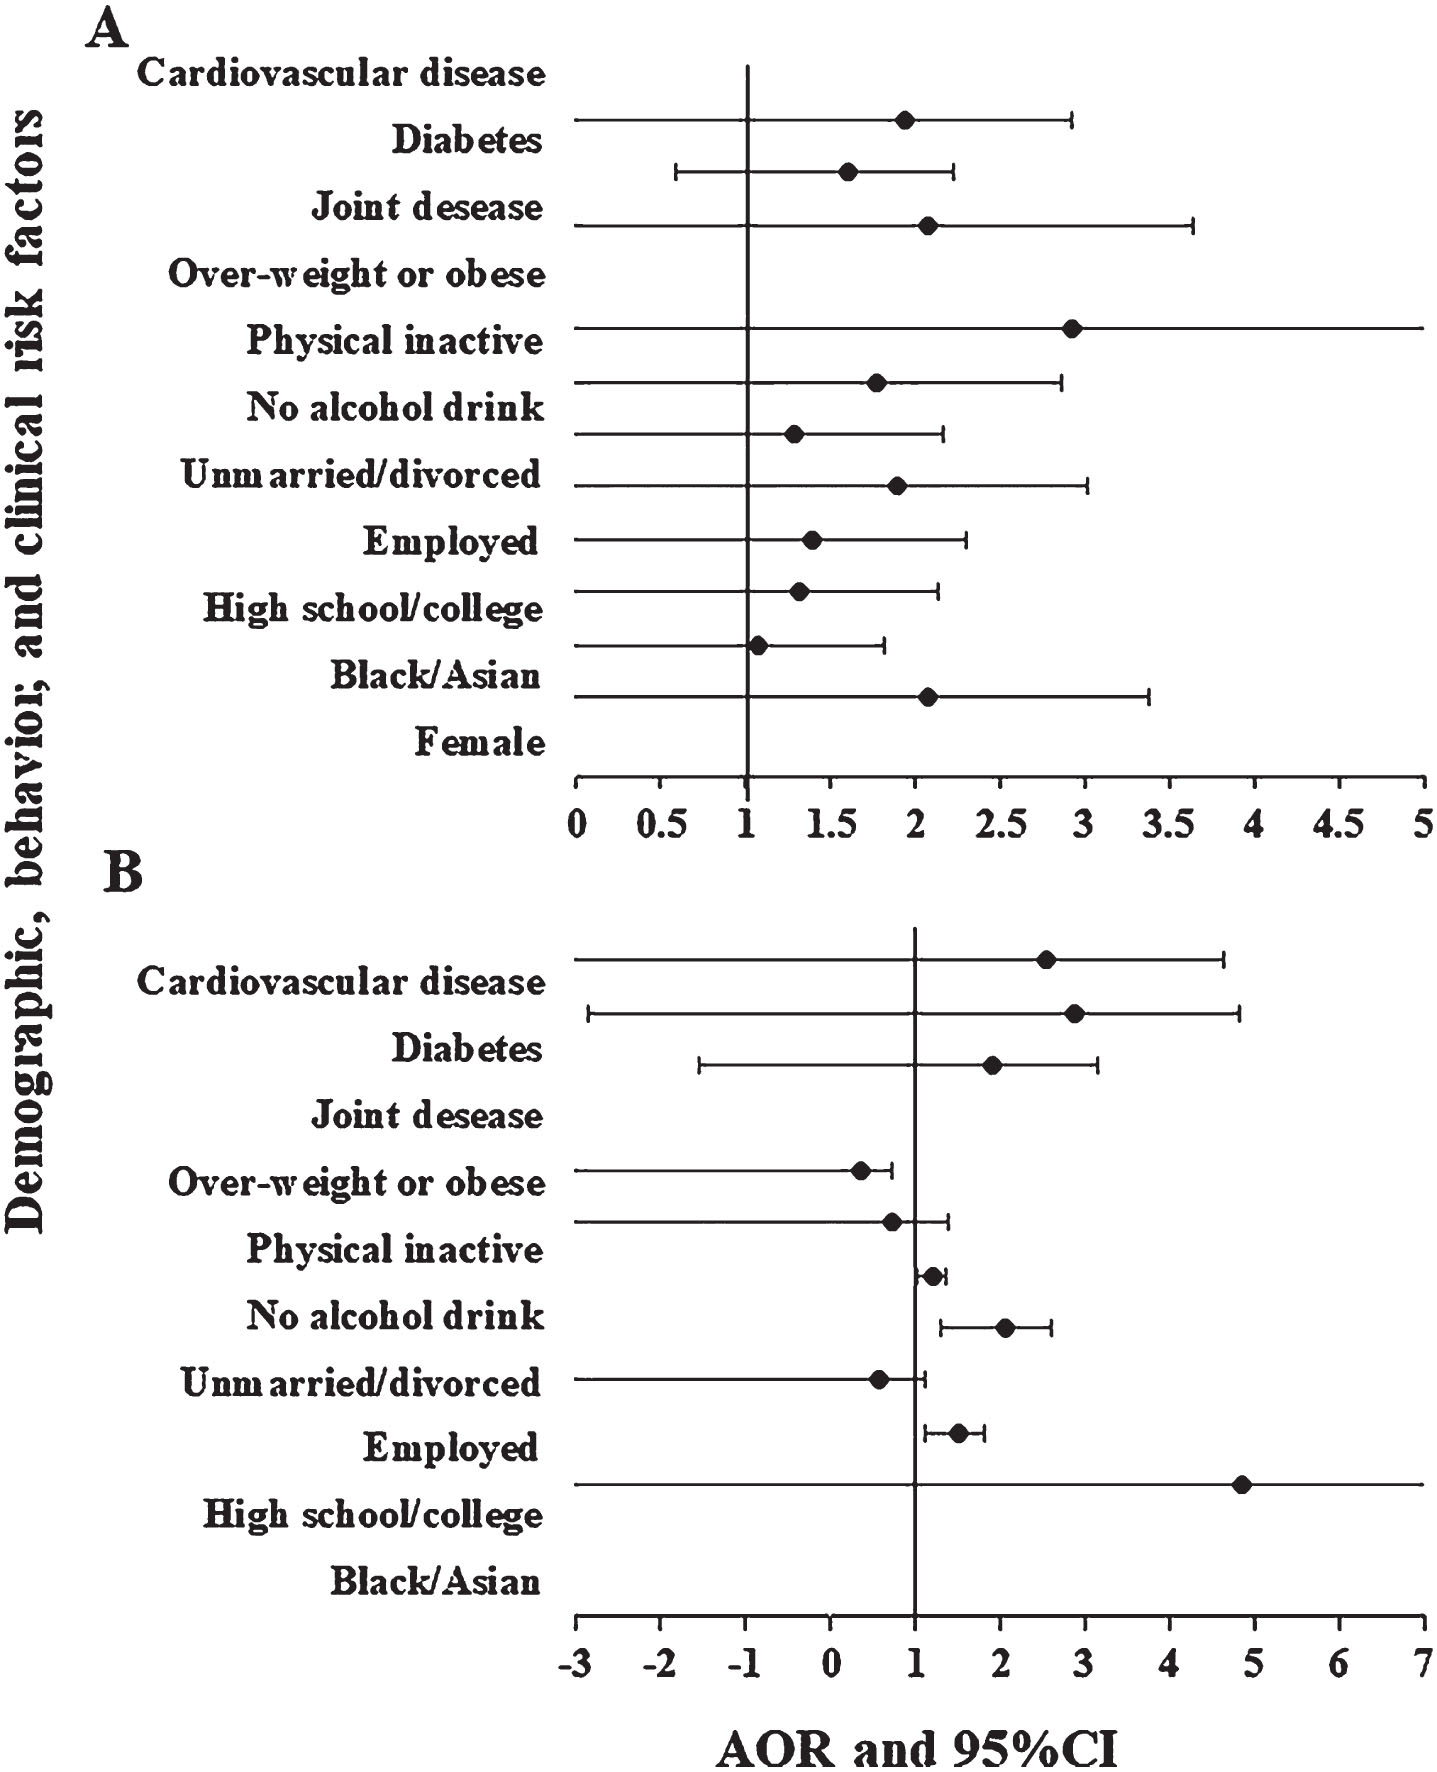 Associations of demographic, behavioral, and clinical risk factors with the risk of asthma among adults who smoked according to grew up living with A) a father or mother who smoked; B) other people who smoked in the workplace. A dark dot circle represents odds ratios, and bars show a 95% confidence interval.